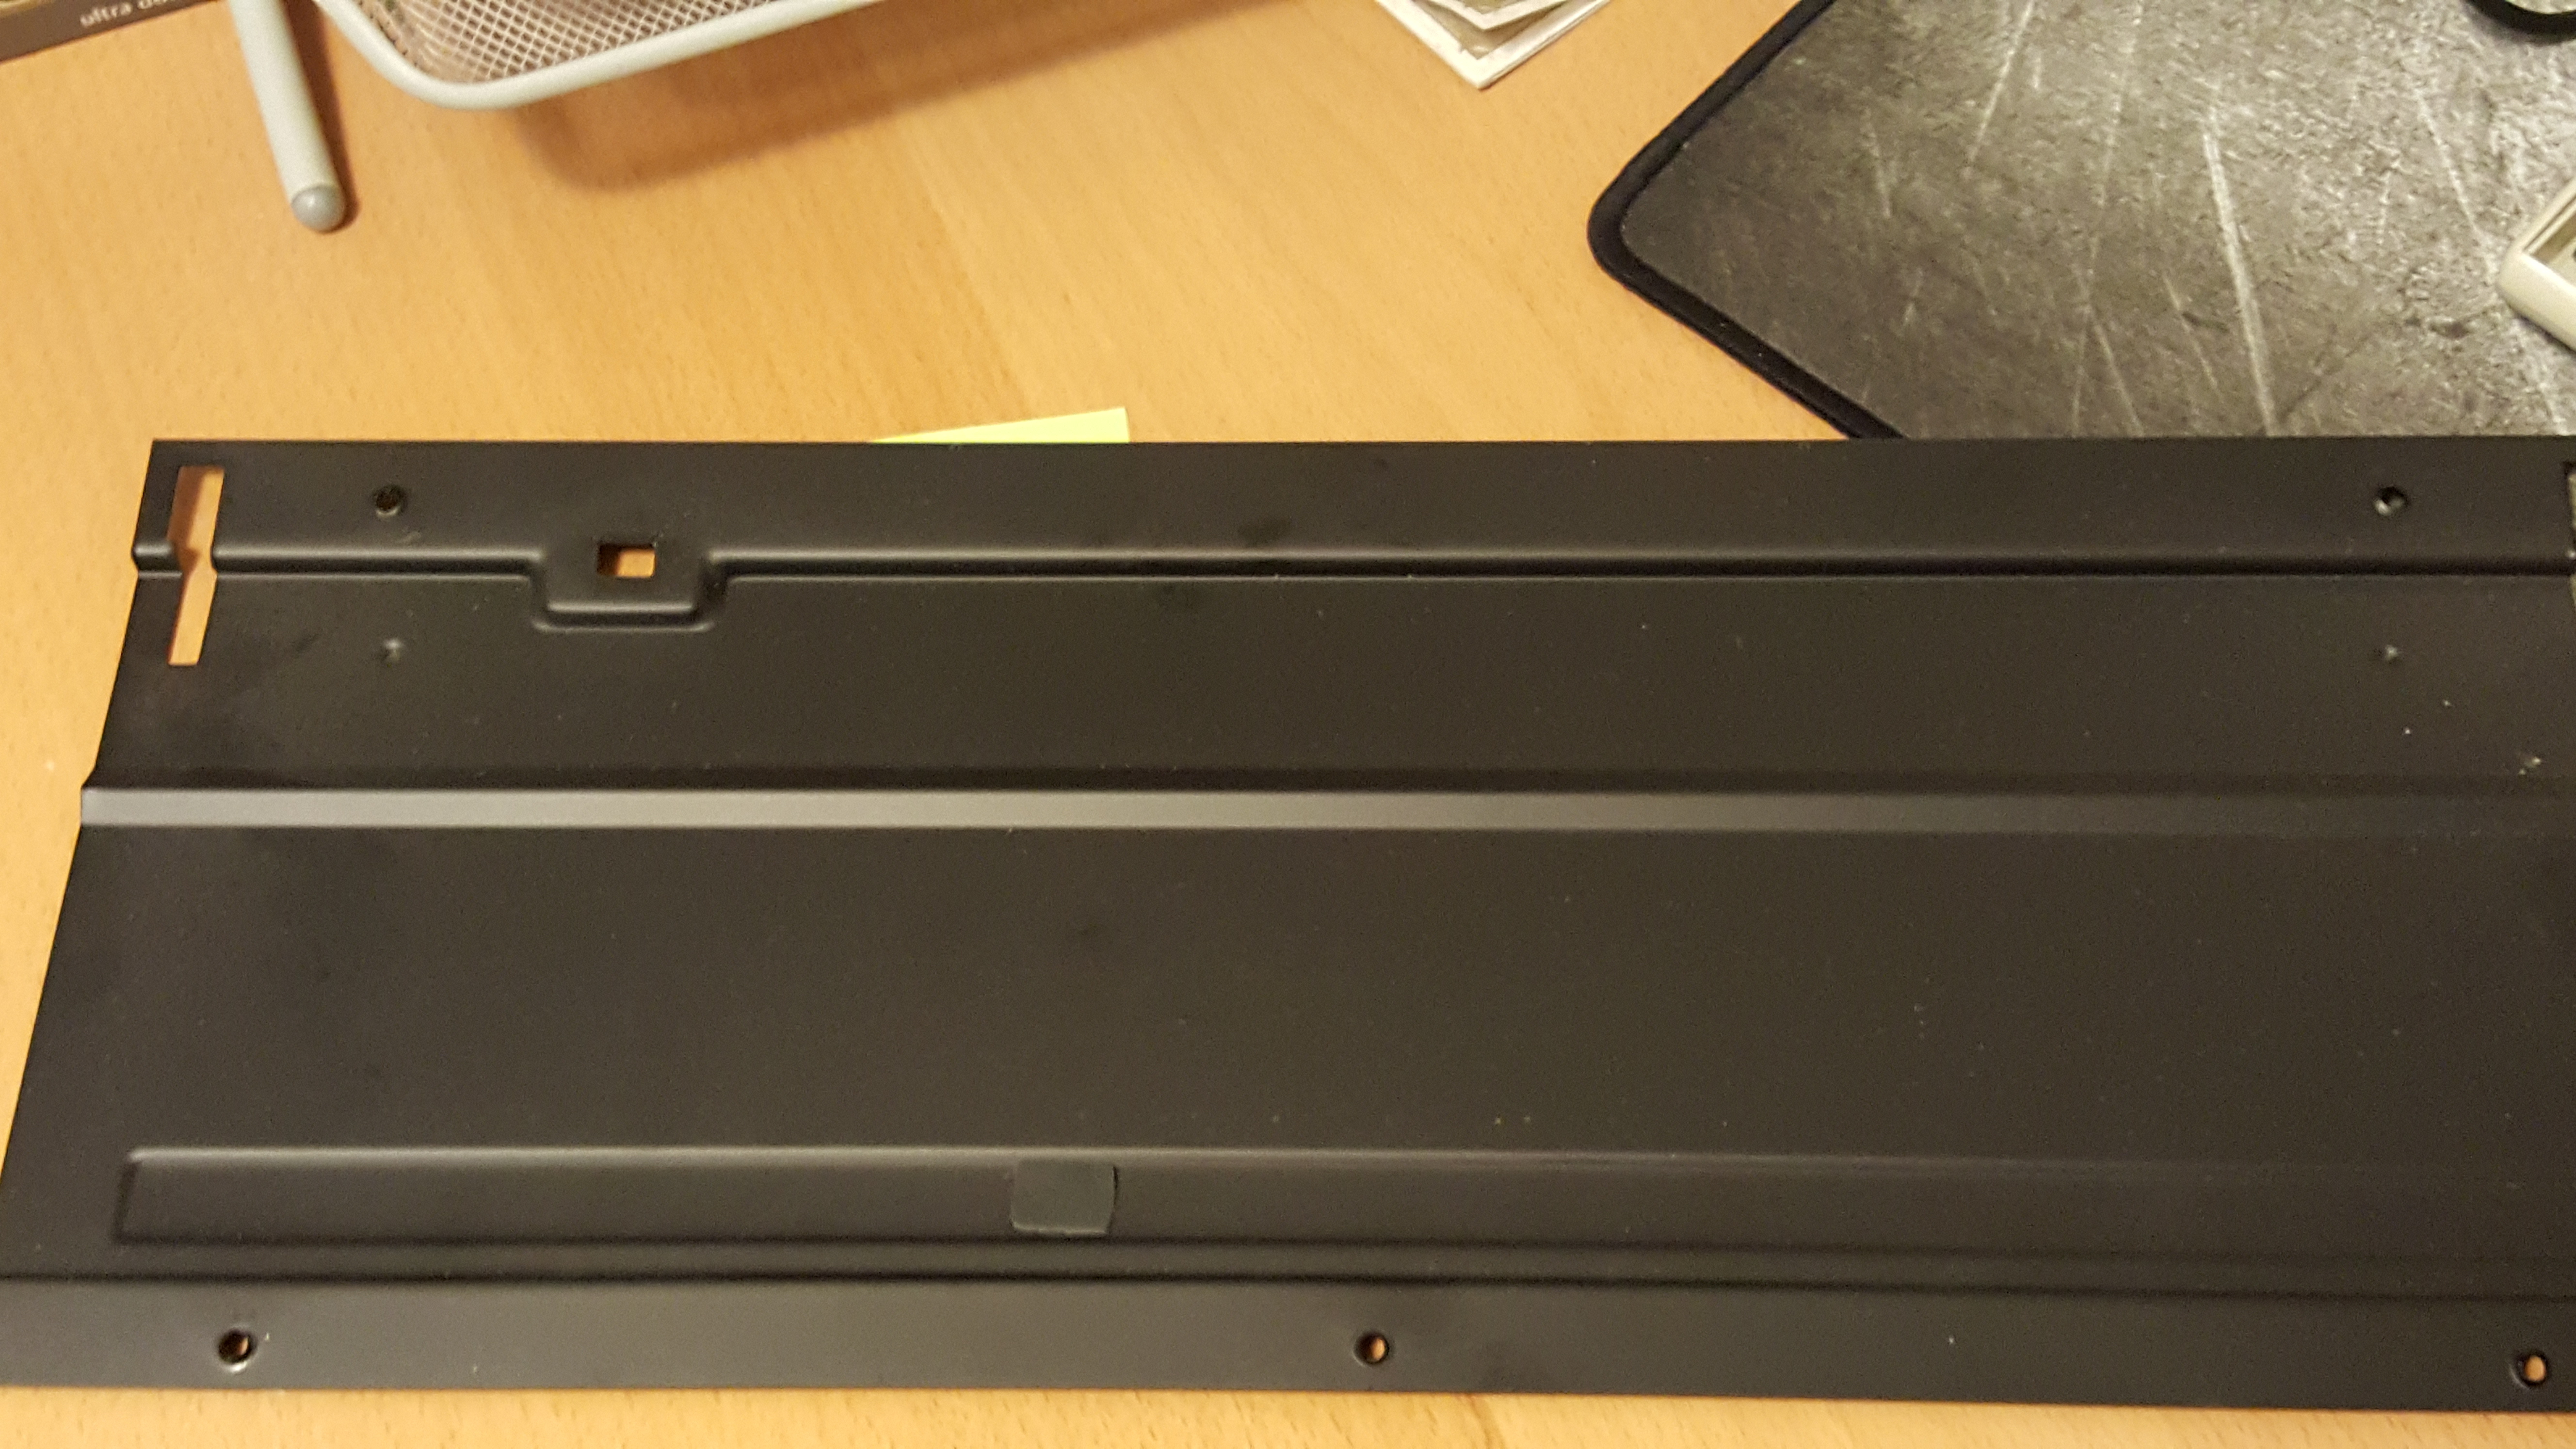 There's you are! The missing rubber pad ended up on the inside of the case plate. No idea who put it there :S